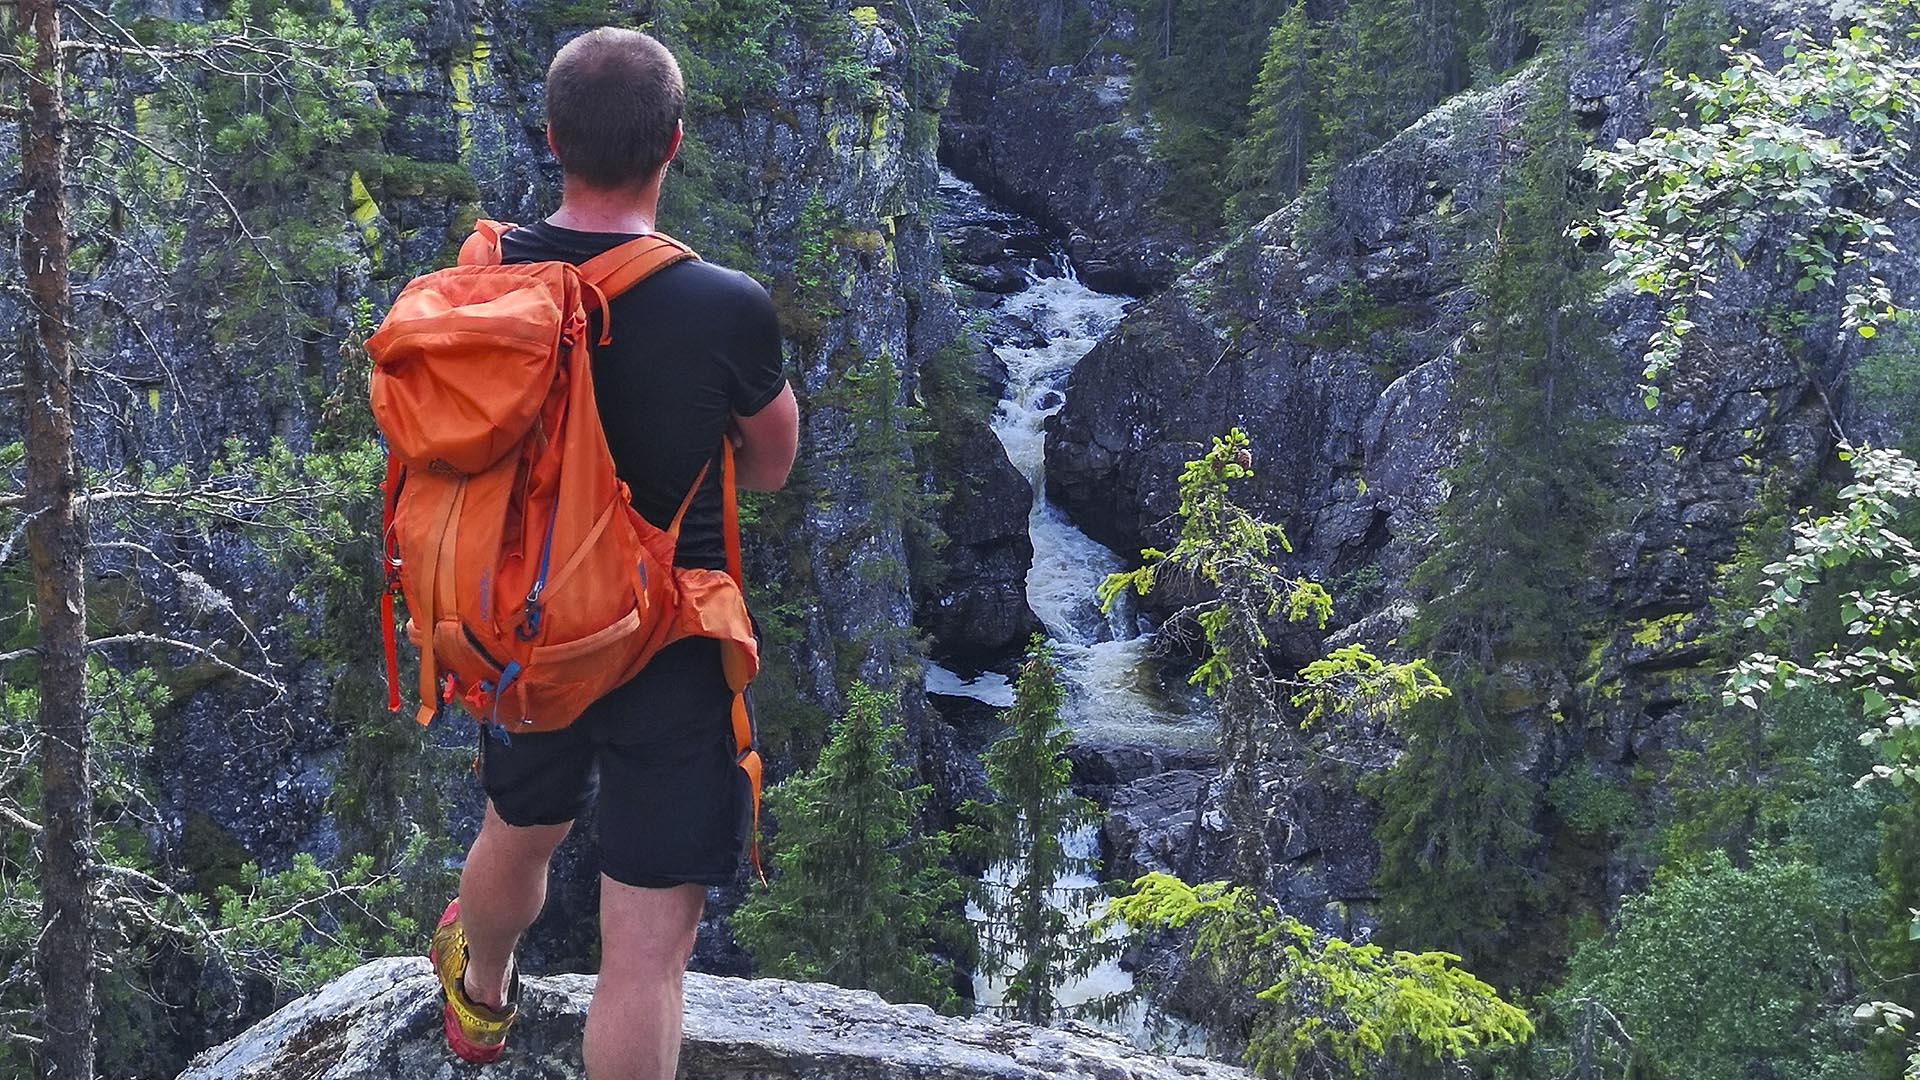 A man with orange backpack stands at an outlook above a river gorge in a forest